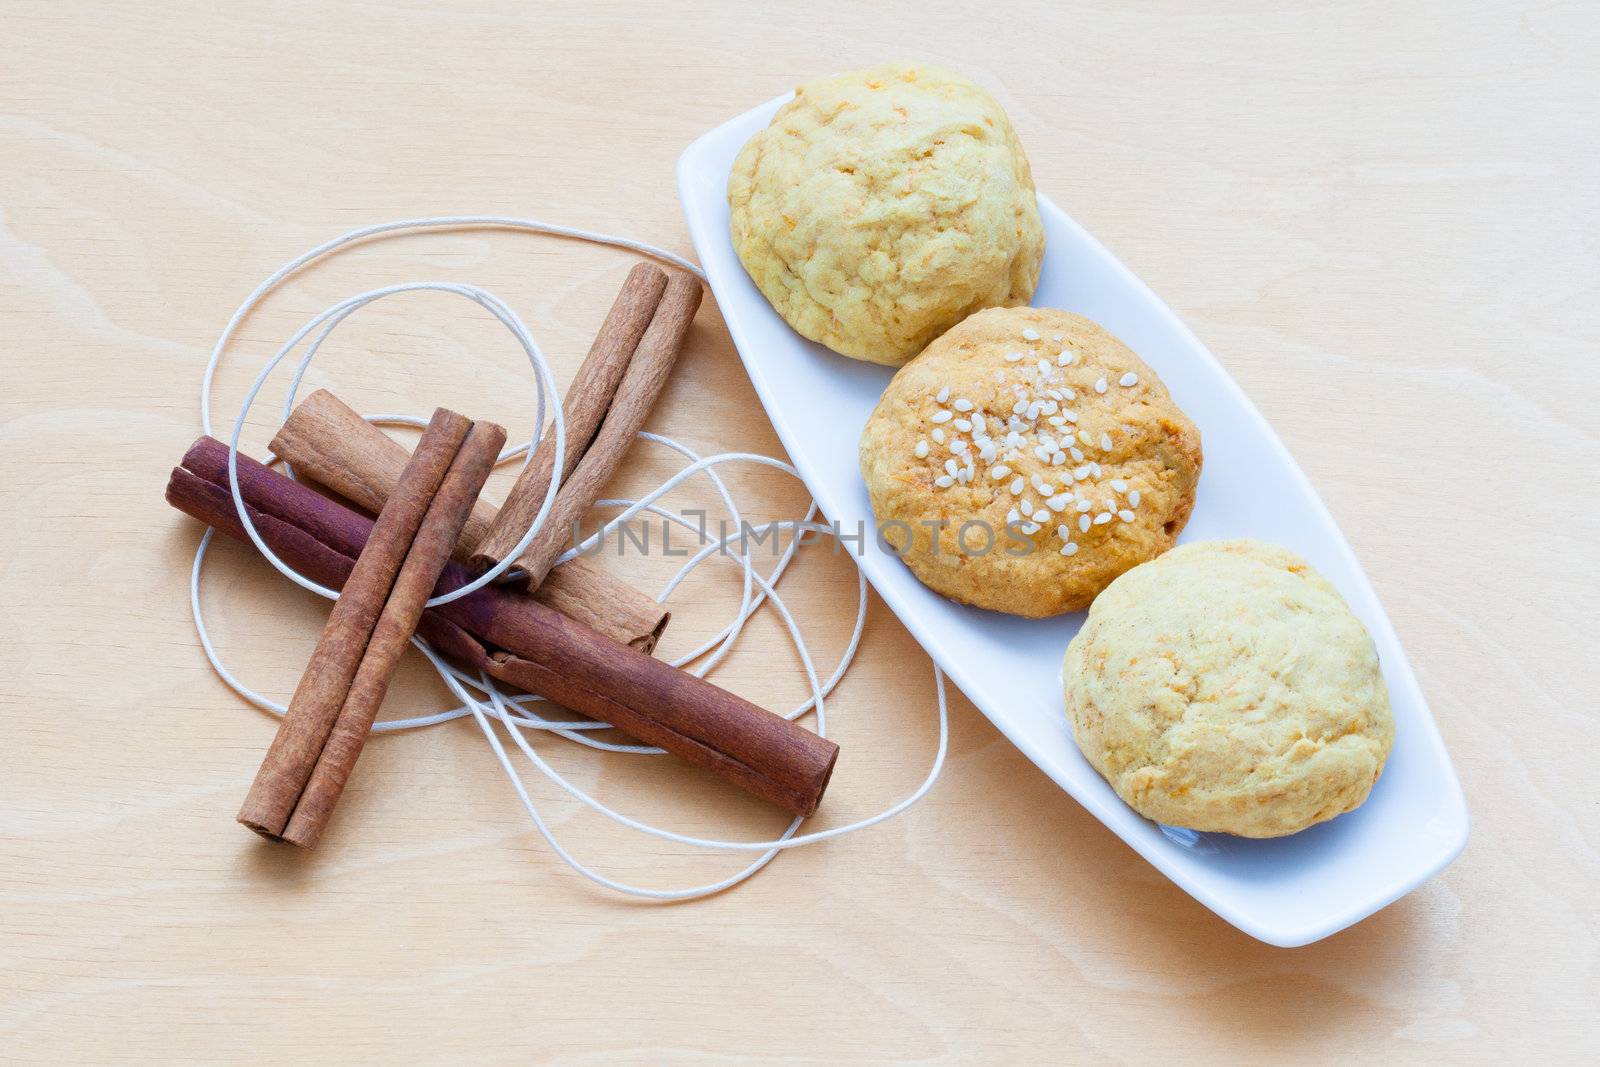 biscuits on a plate and cinnamon sticks by sfinks